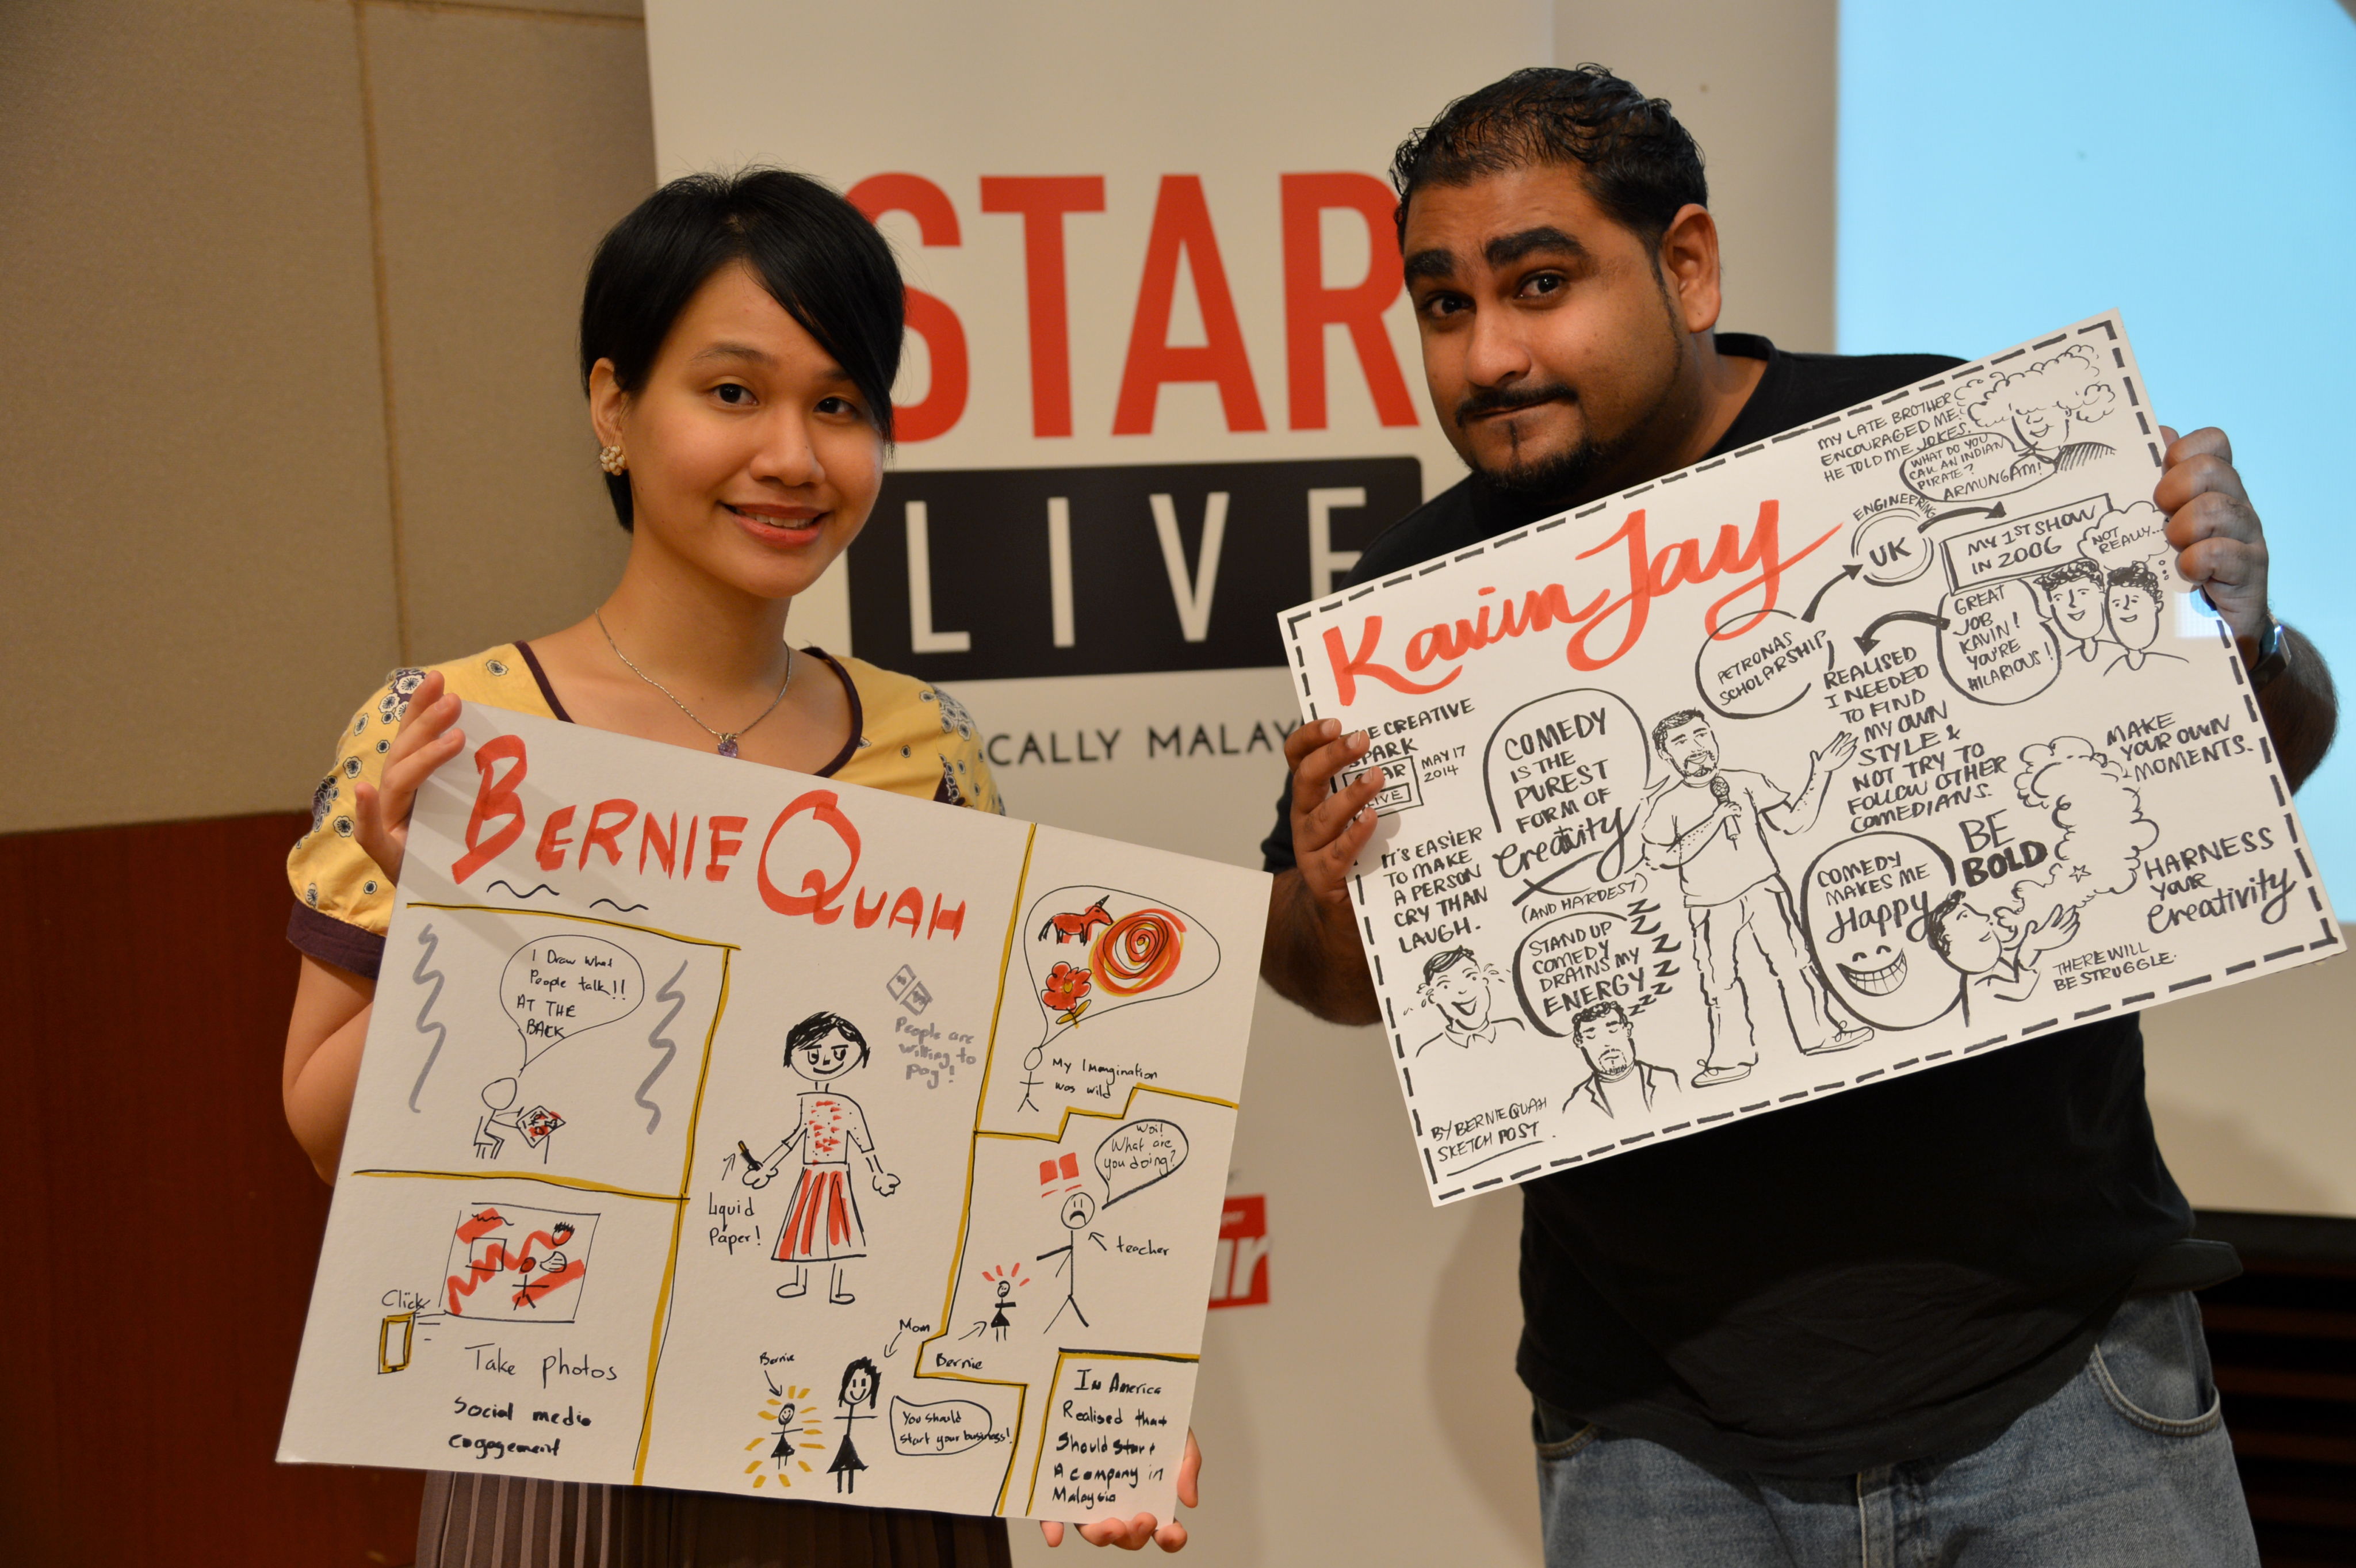 Creative differences: Graphic recorder Bernie Quah and comedian Kavin Jay spoke about 'The Creative Spark' at last Saturday's StarLIVE session in Menara Star.